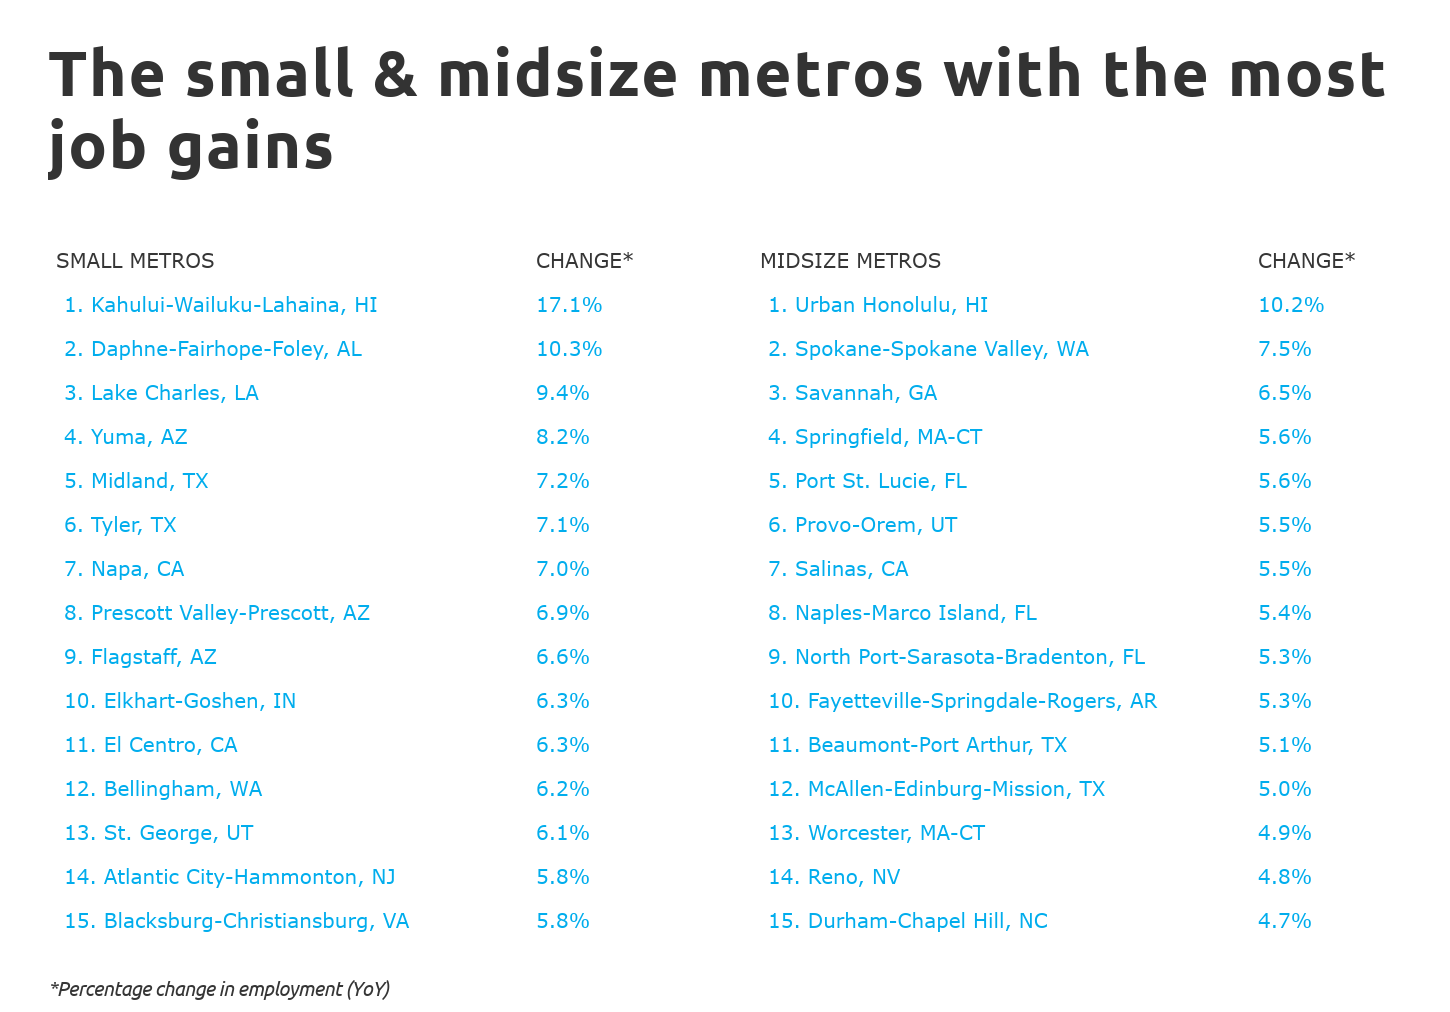 The small midsize metros with the most job gains